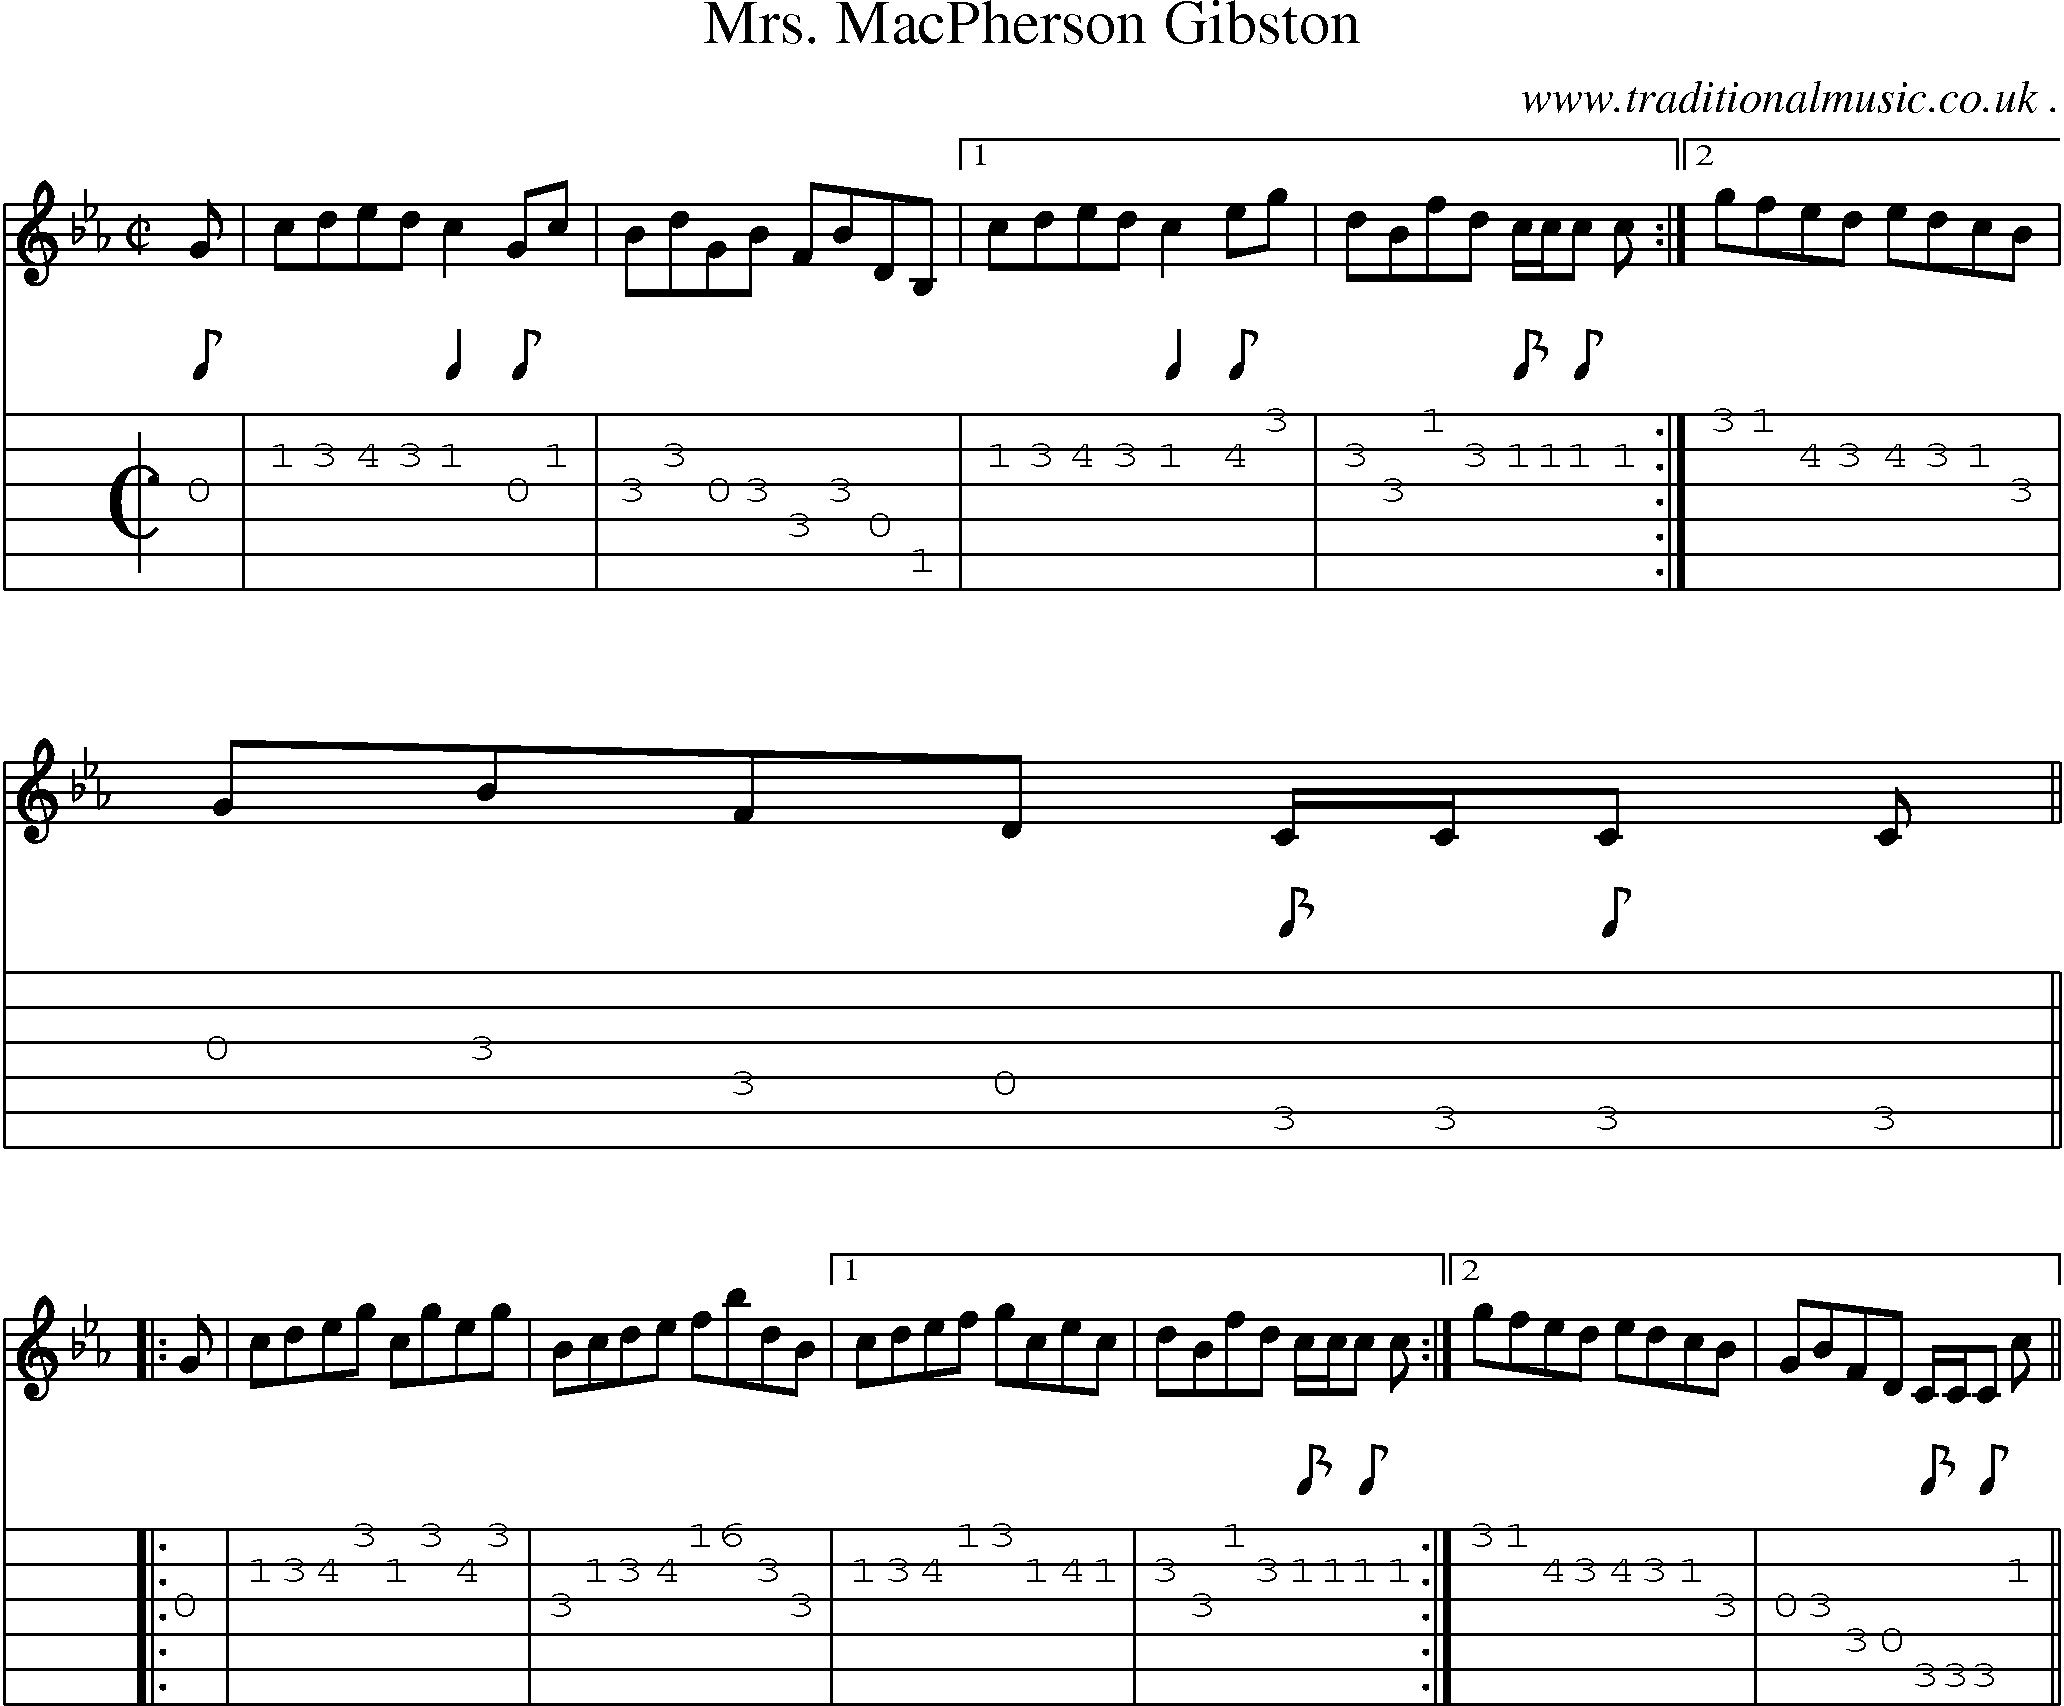 Sheet-music  score, Chords and Guitar Tabs for Mrs Macpherson Gibston